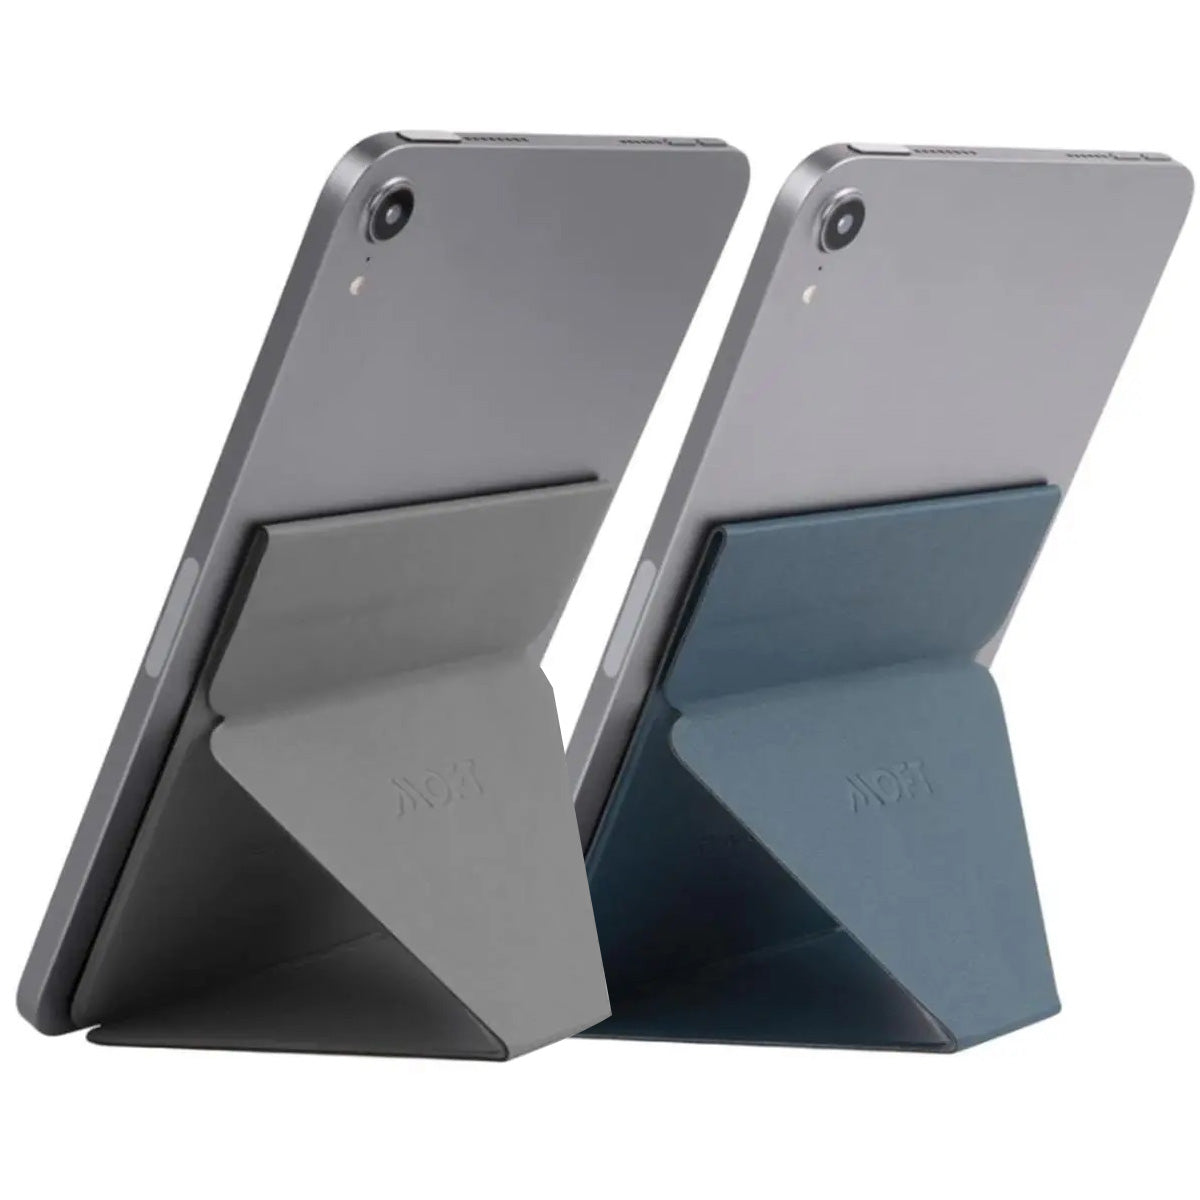 Moft Snap Tablet Stand